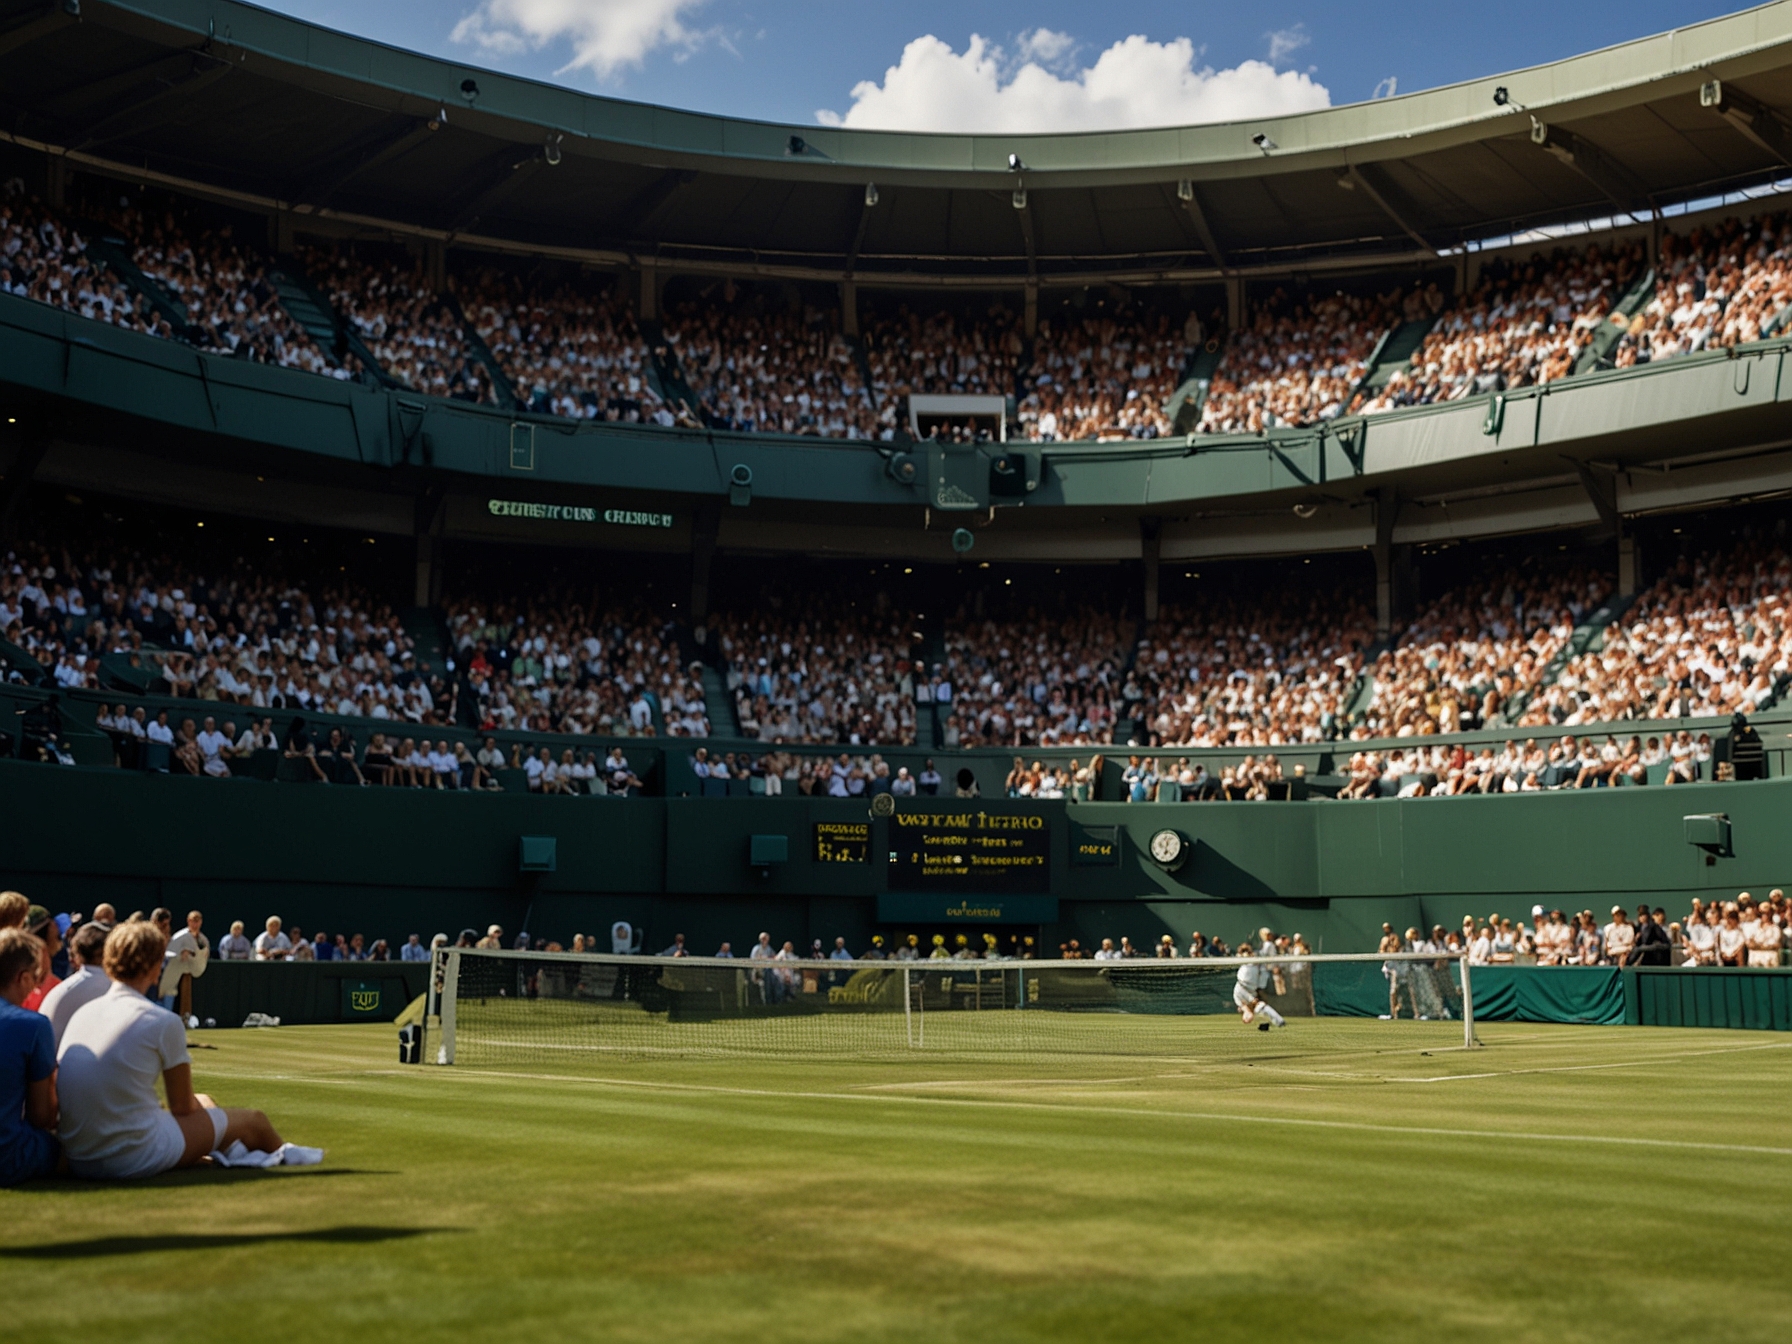 The iconic Centre Court at Wimbledon, with its lush grass surface, ready for the 2024 Grand Slam event. Spectators fill the stands, anticipating a thrilling match.